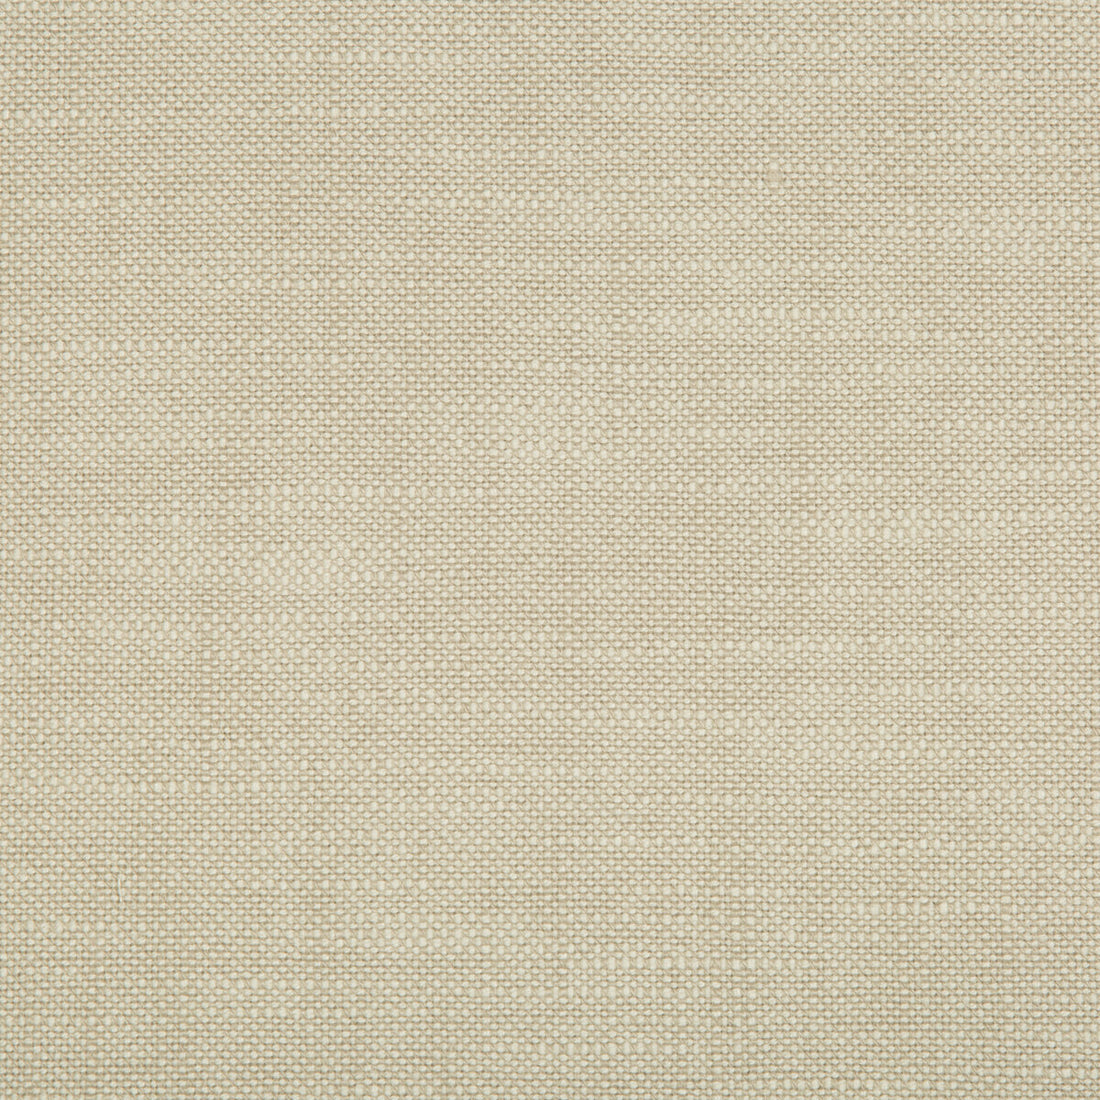 Kravet Smart fabric in 34623-1116 color - pattern 34623.1116.0 - by Kravet Smart in the Performance Crypton Home collection